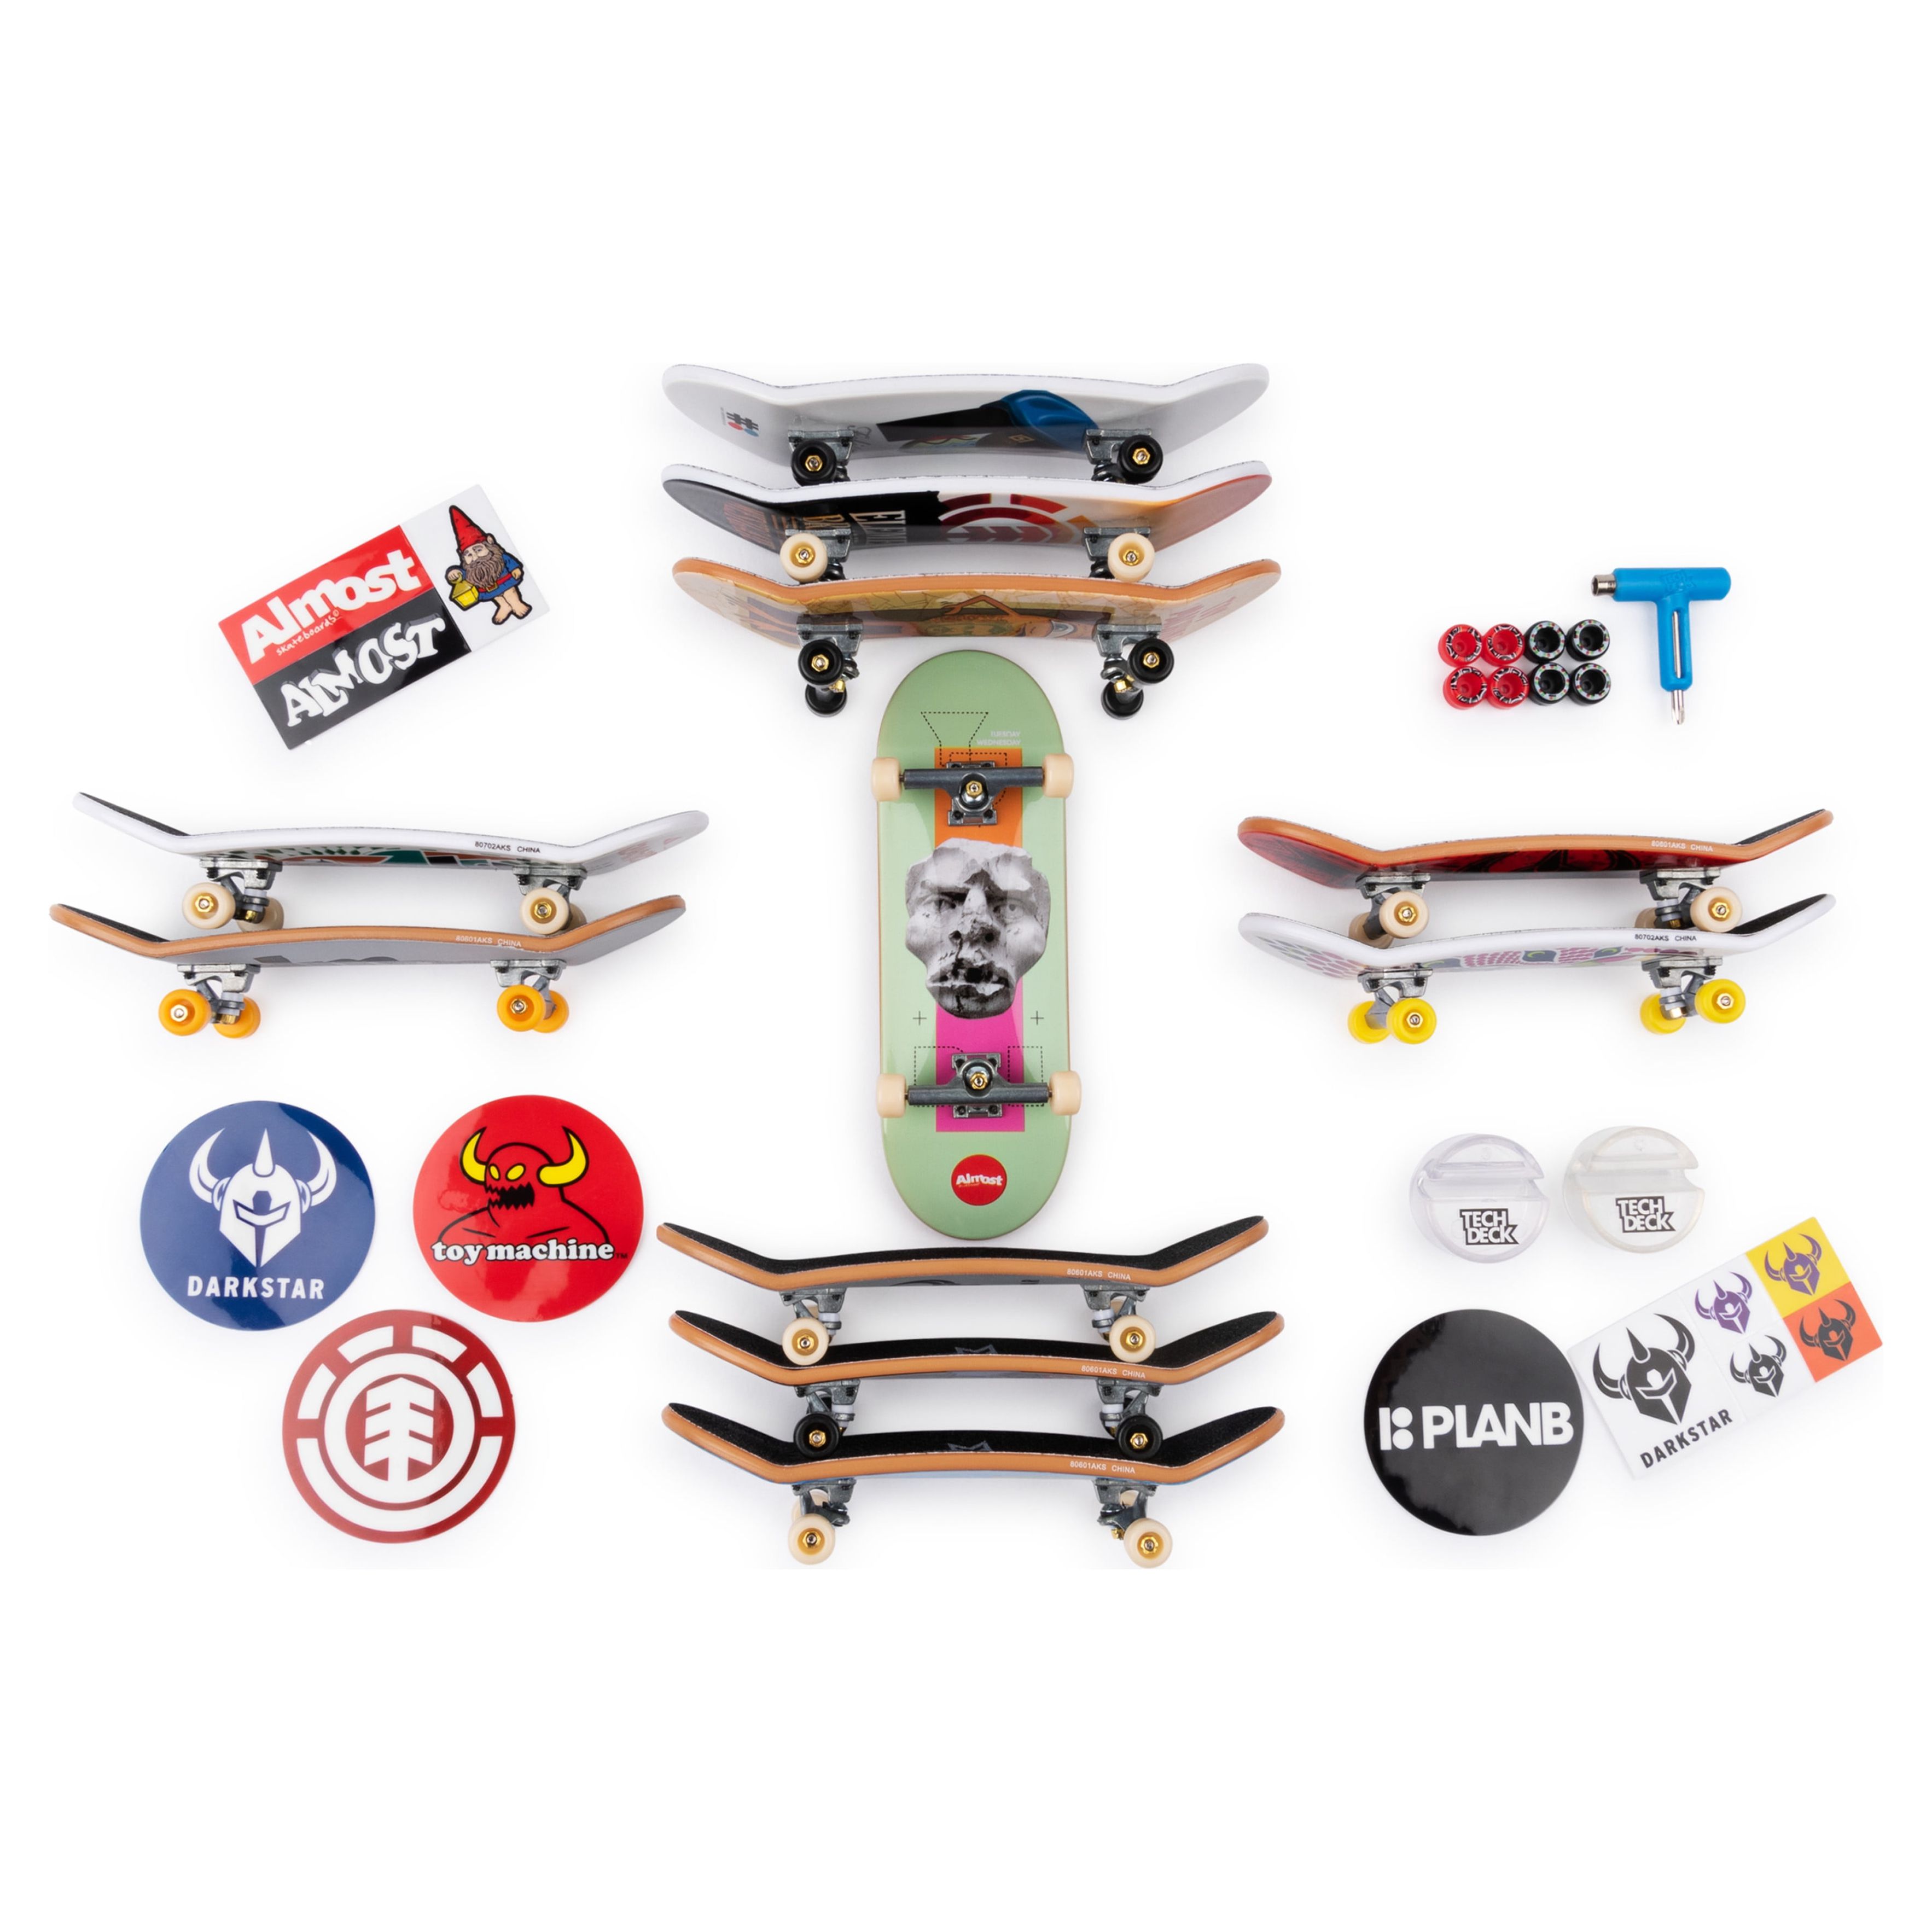 Tech Deck, 96mm Fingerboard Mini Skateboard with Authentic Designs, For Ages 6 and Up (Styles May Vary) - image 3 of 8